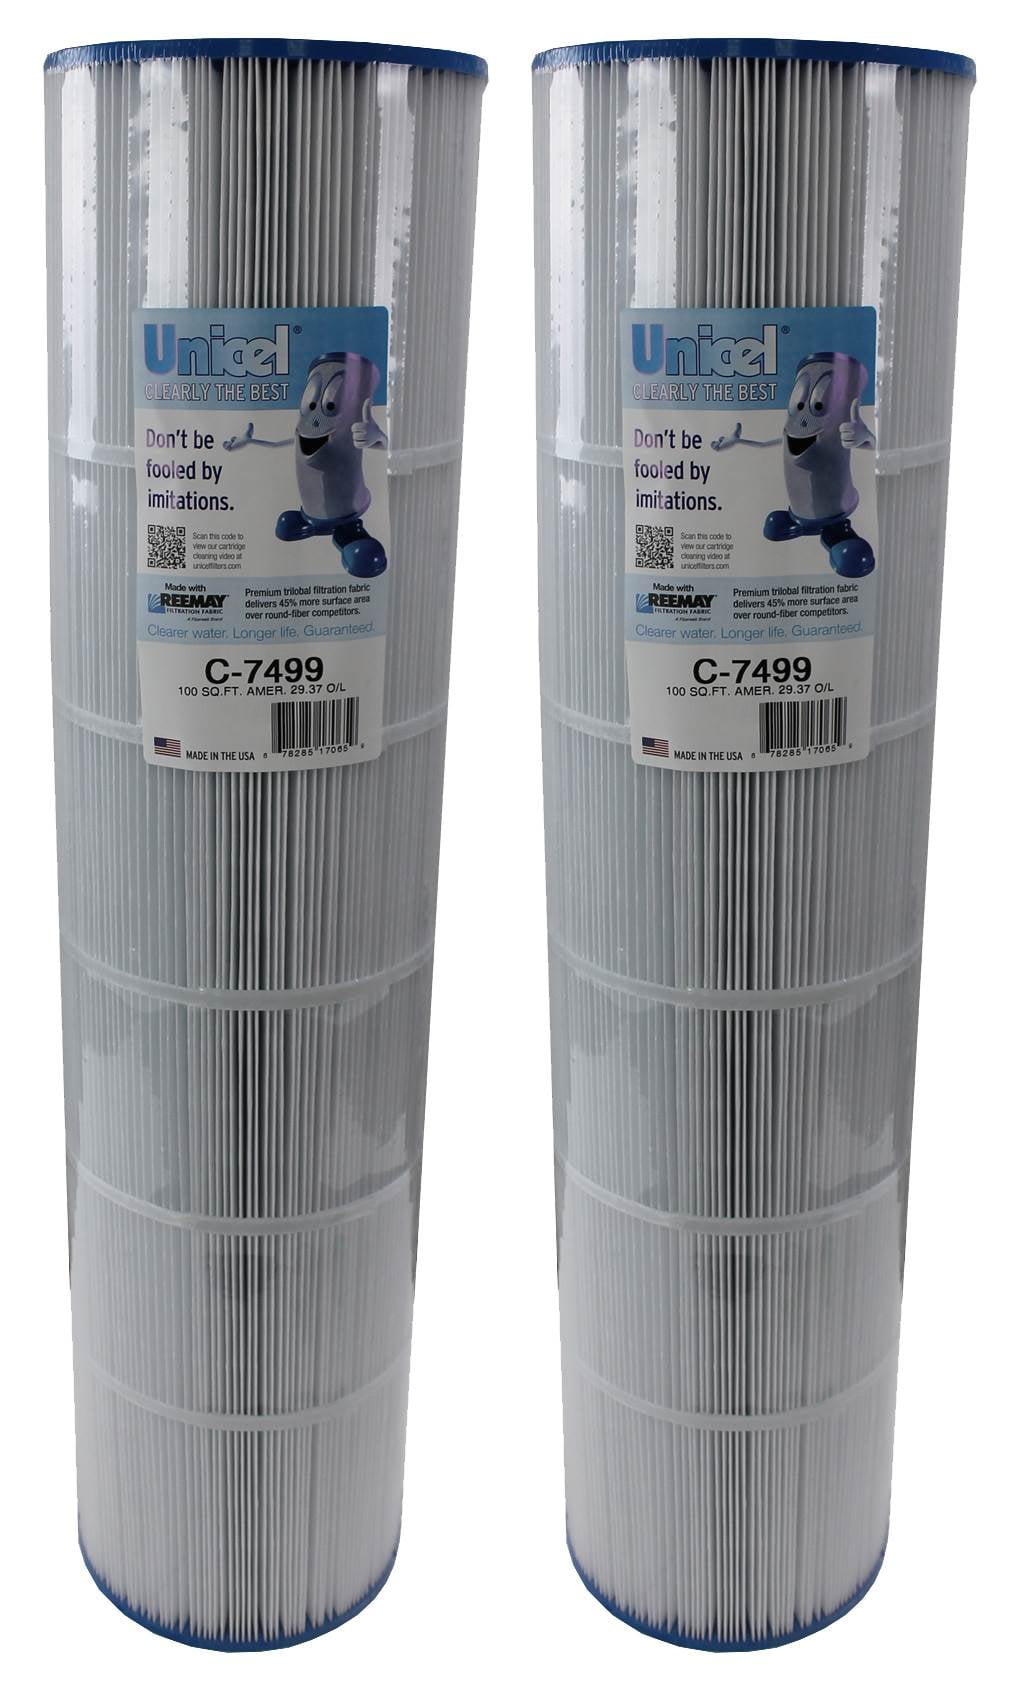 Premier Unicel C-7499 Replacement Filter Cartridge for 100 Square Foot American 